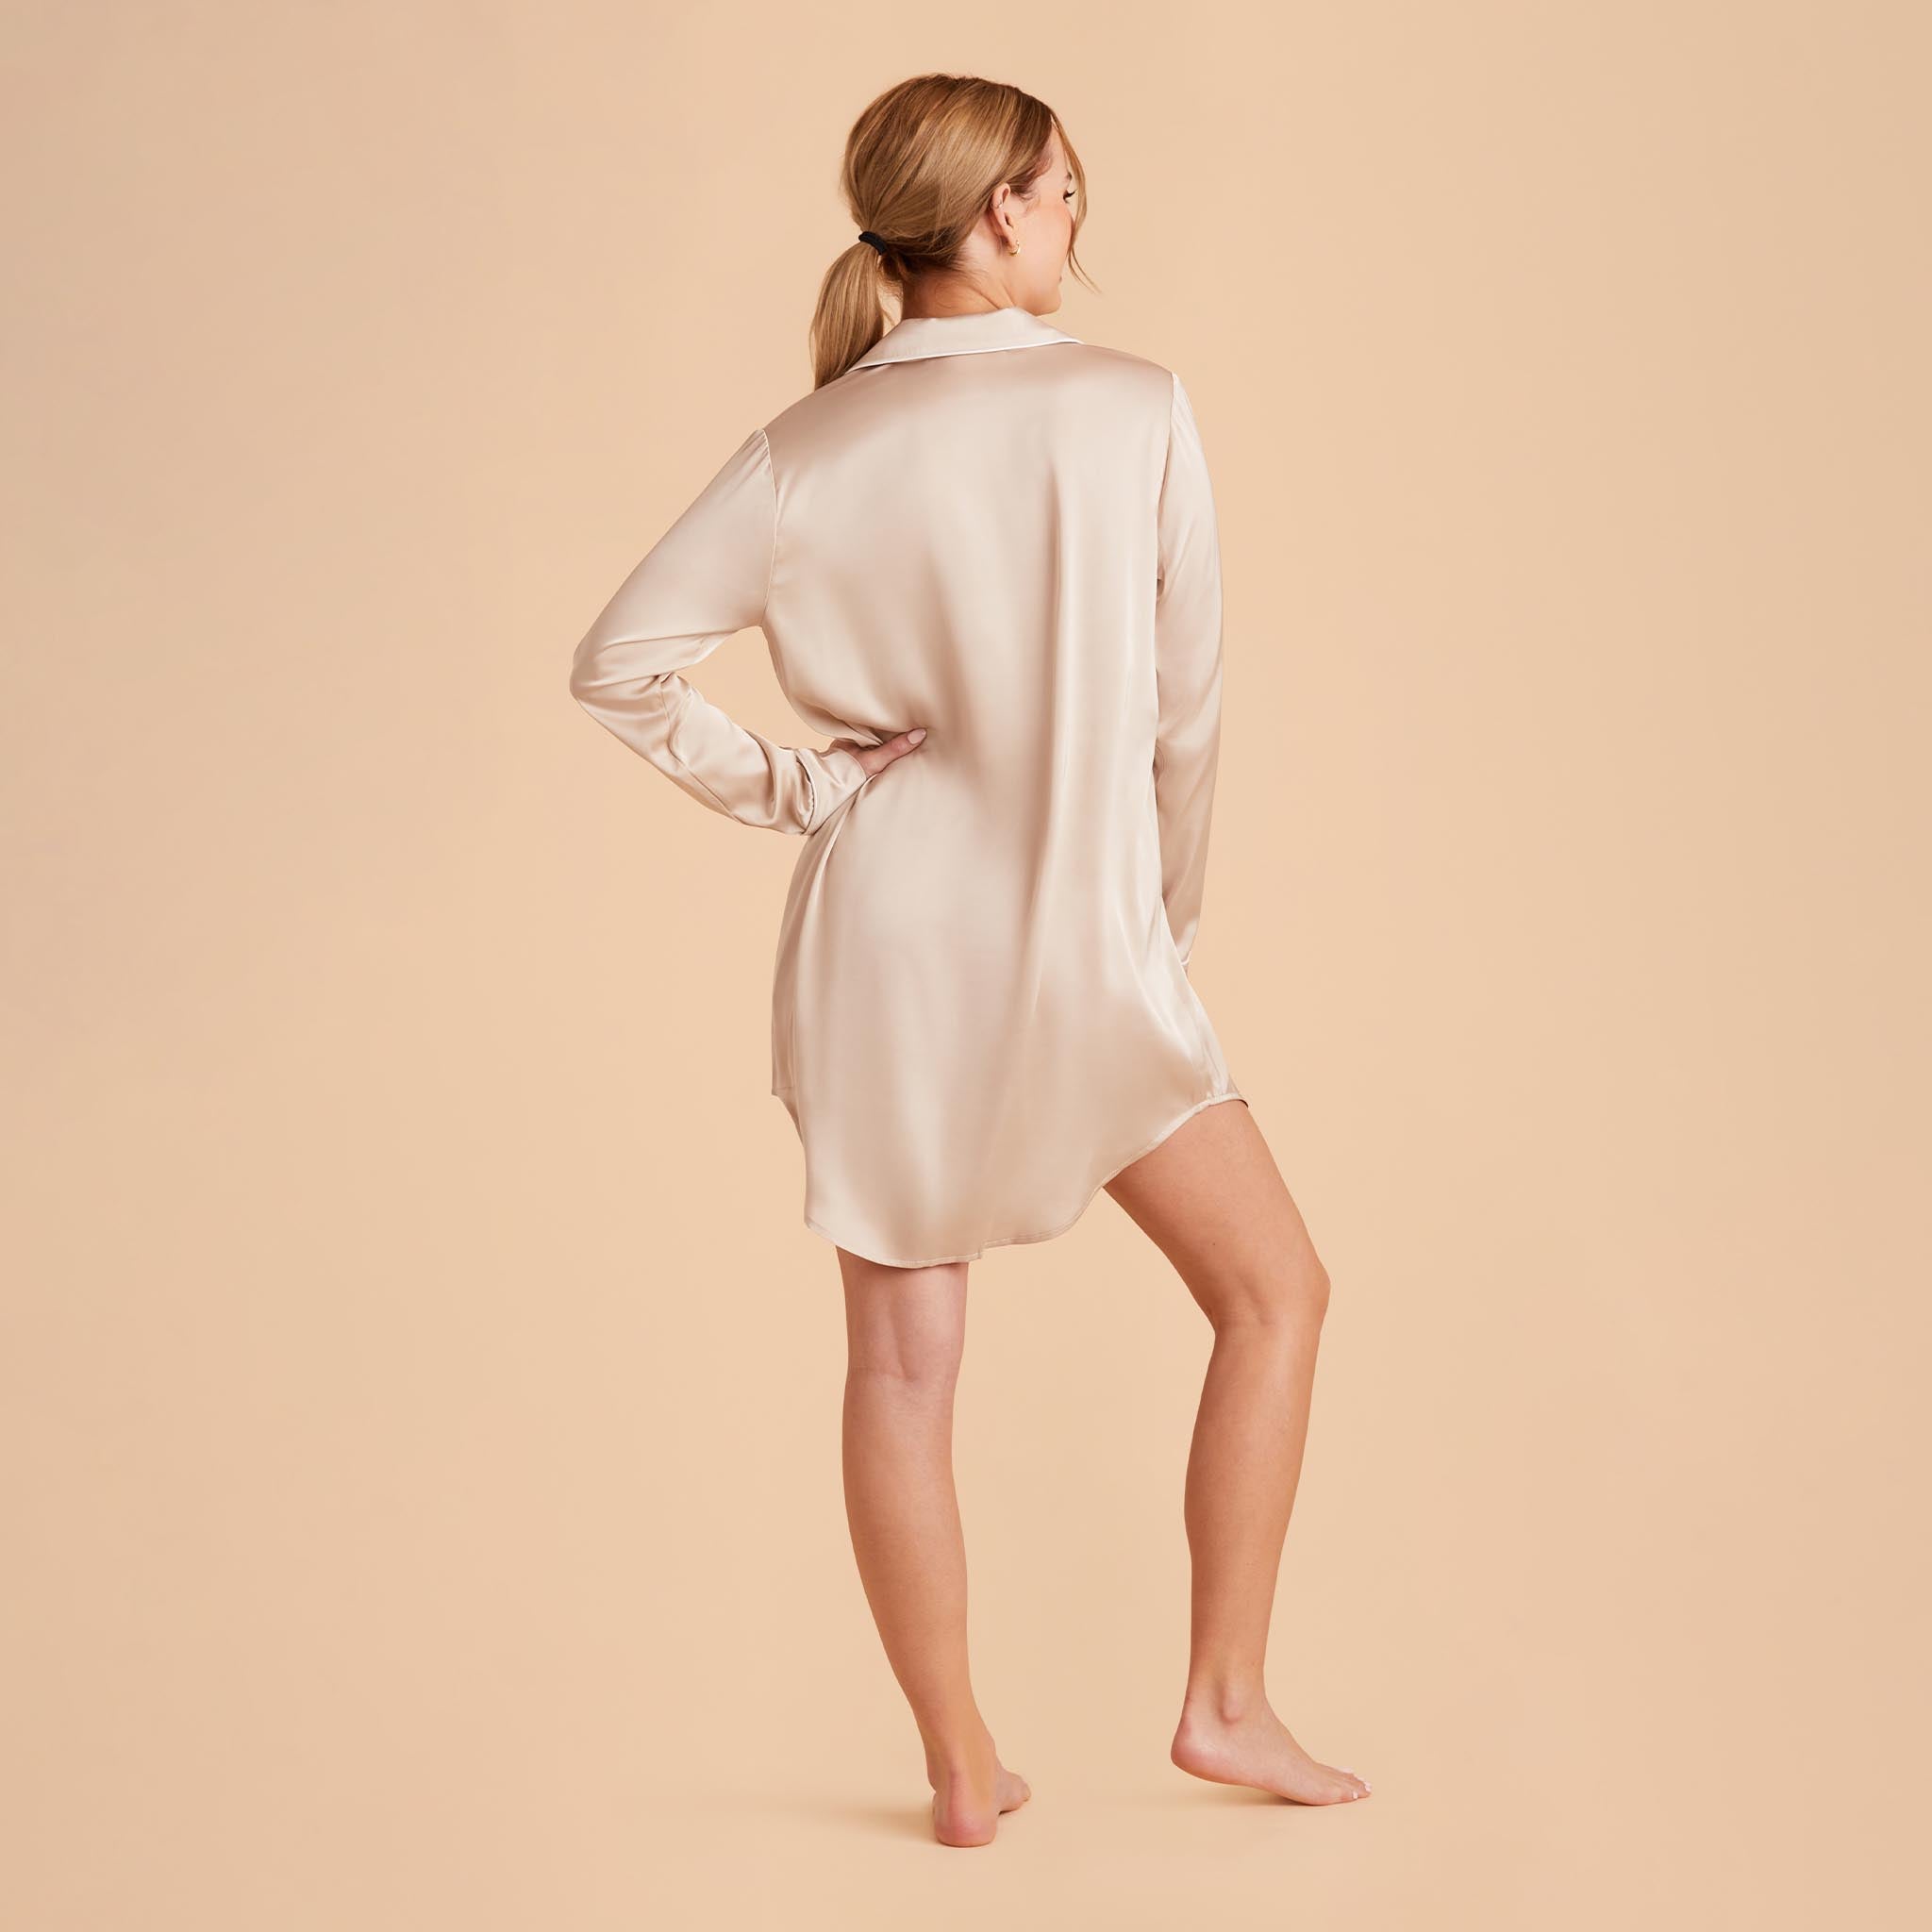 Satin Sleepshirt in champagne by Birdy Grey, back view